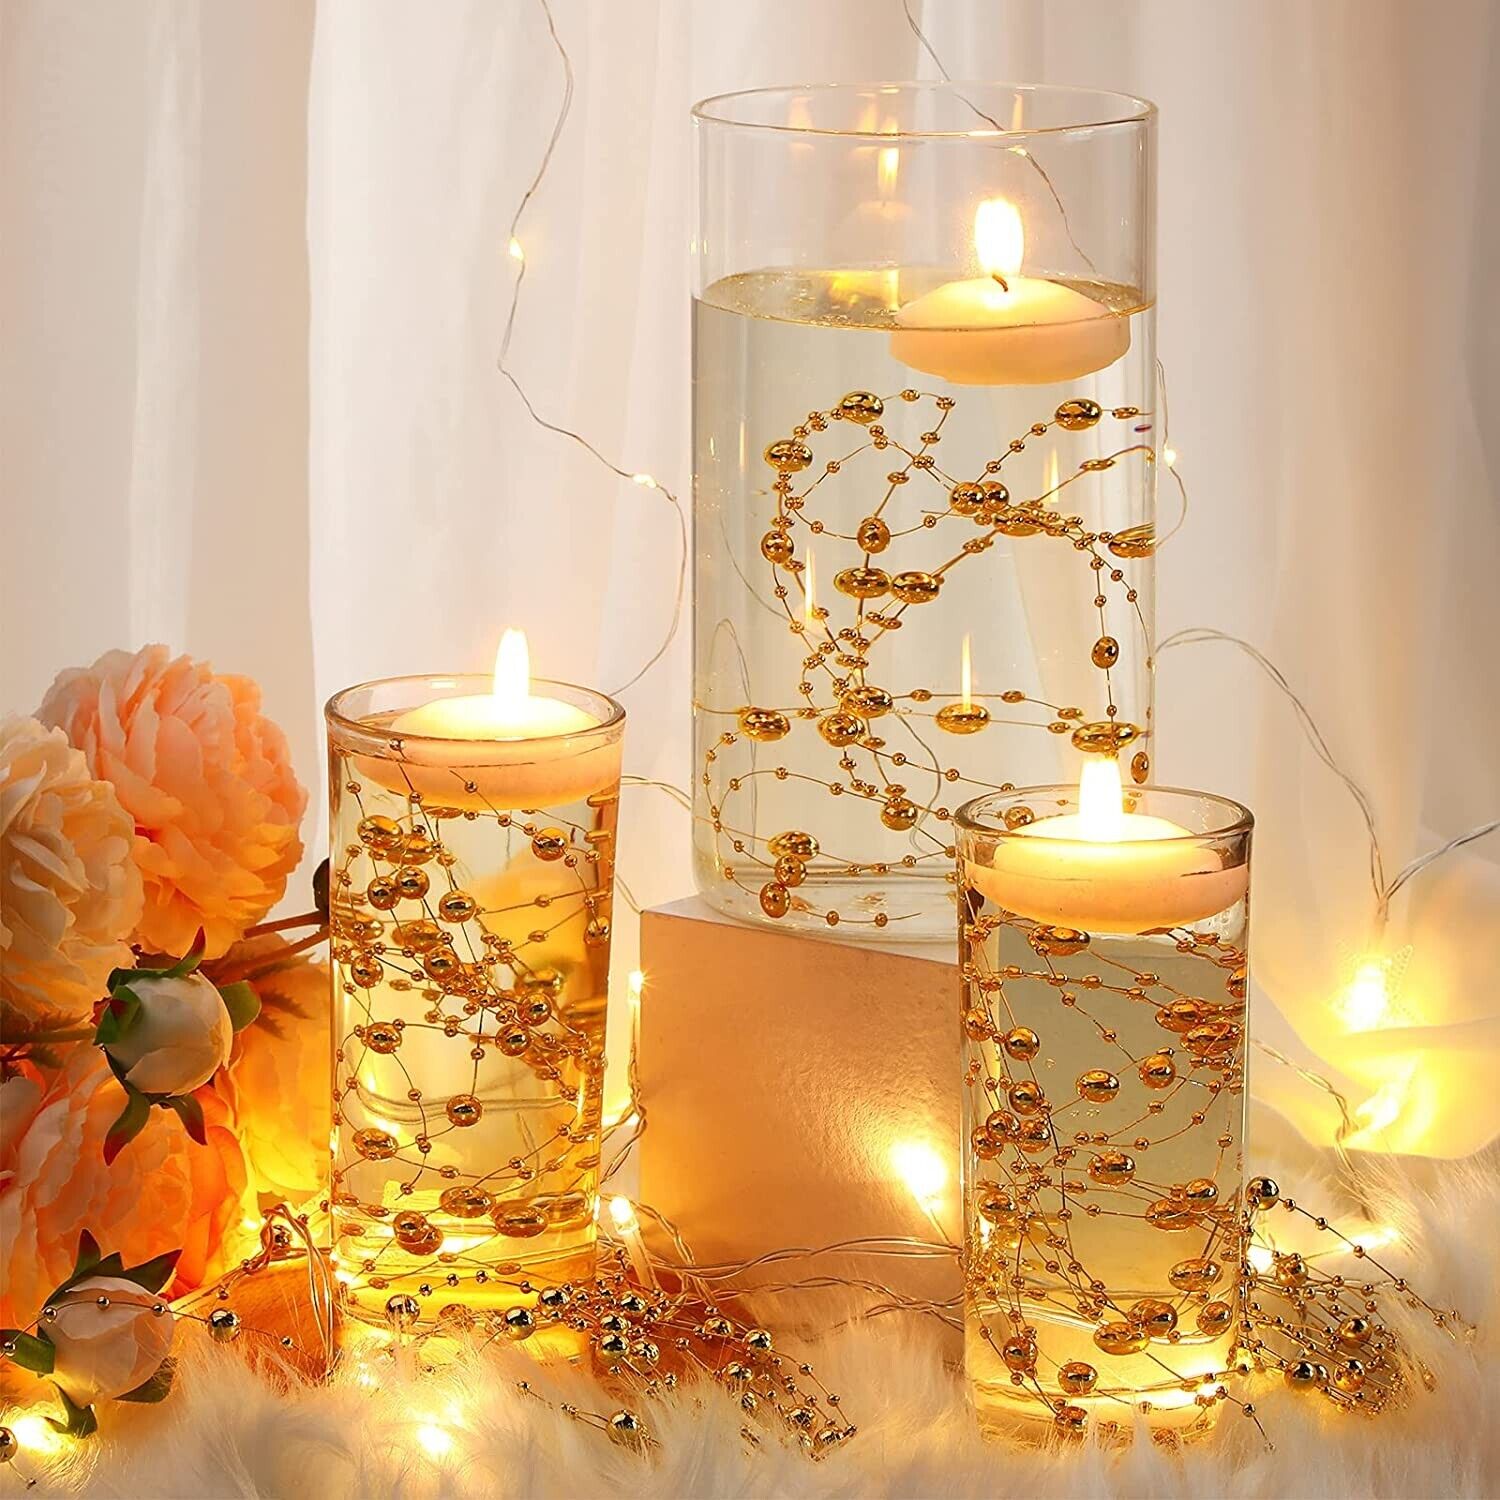 12 Pcs Floating Candles with Magic Wand Remote, Hanging Candles with String